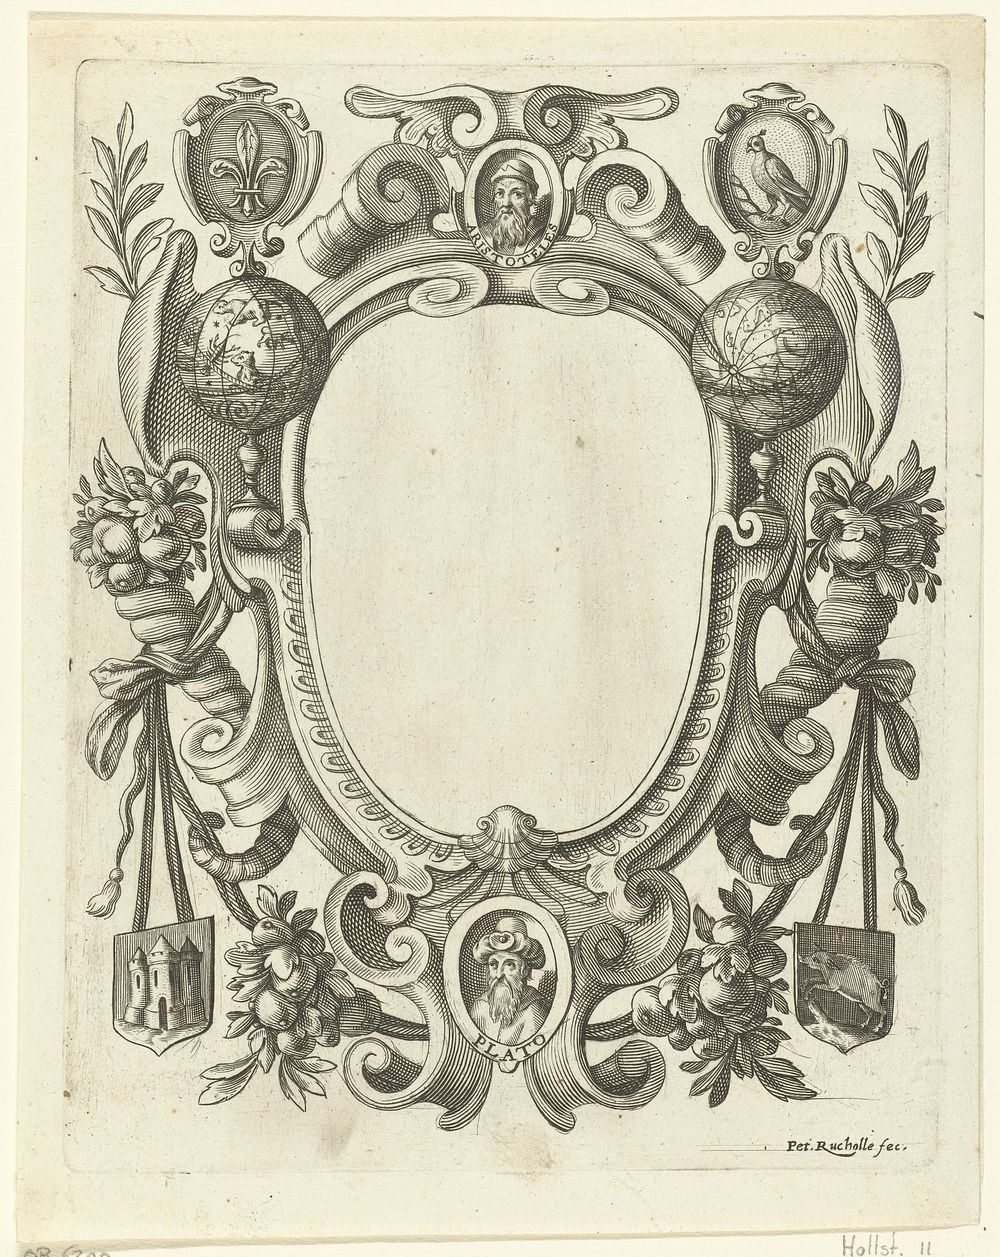 Cartouche (c. 1628 - before 1647) by Petrus Rucholle, Federico Zuccaro and anonymous